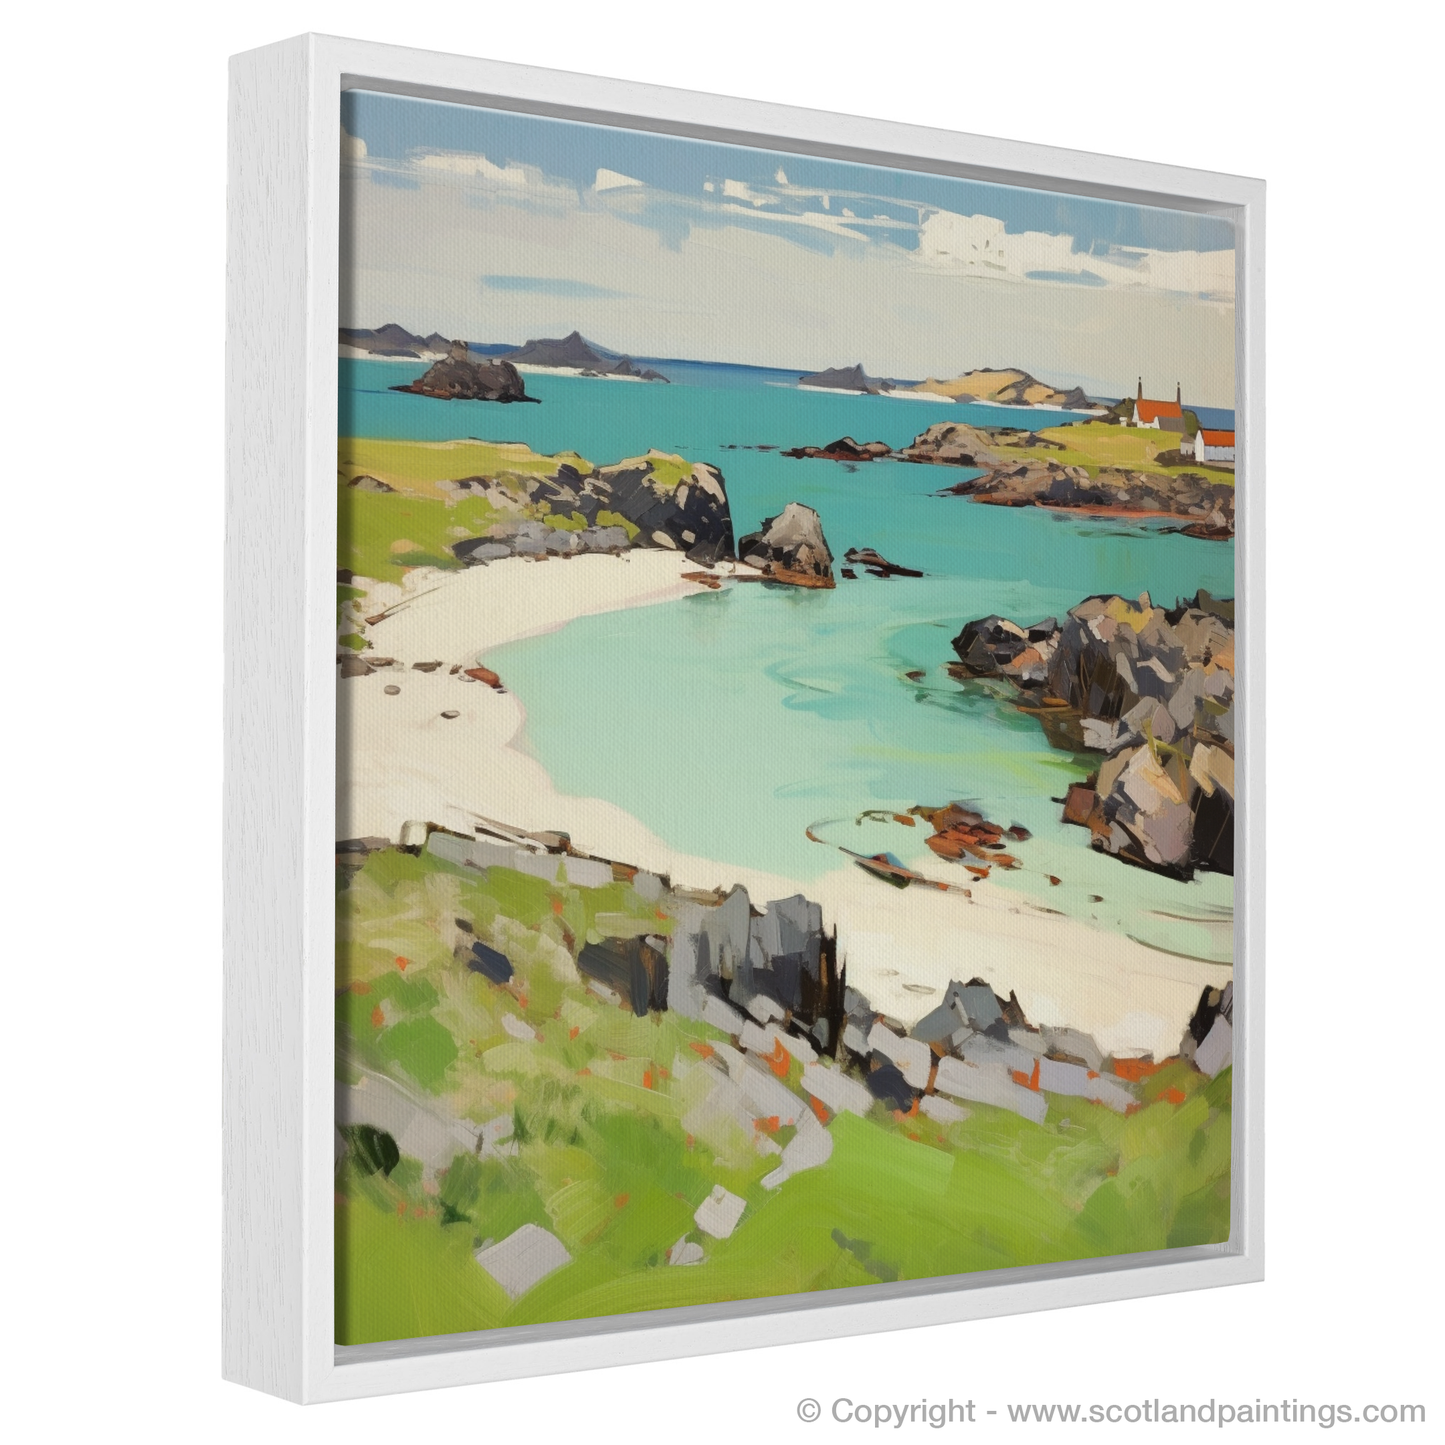 Painting and Art Print of Isle of Iona, Inner Hebrides entitled "Isle of Iona: Abstract Expressions of Scottish Serenity".